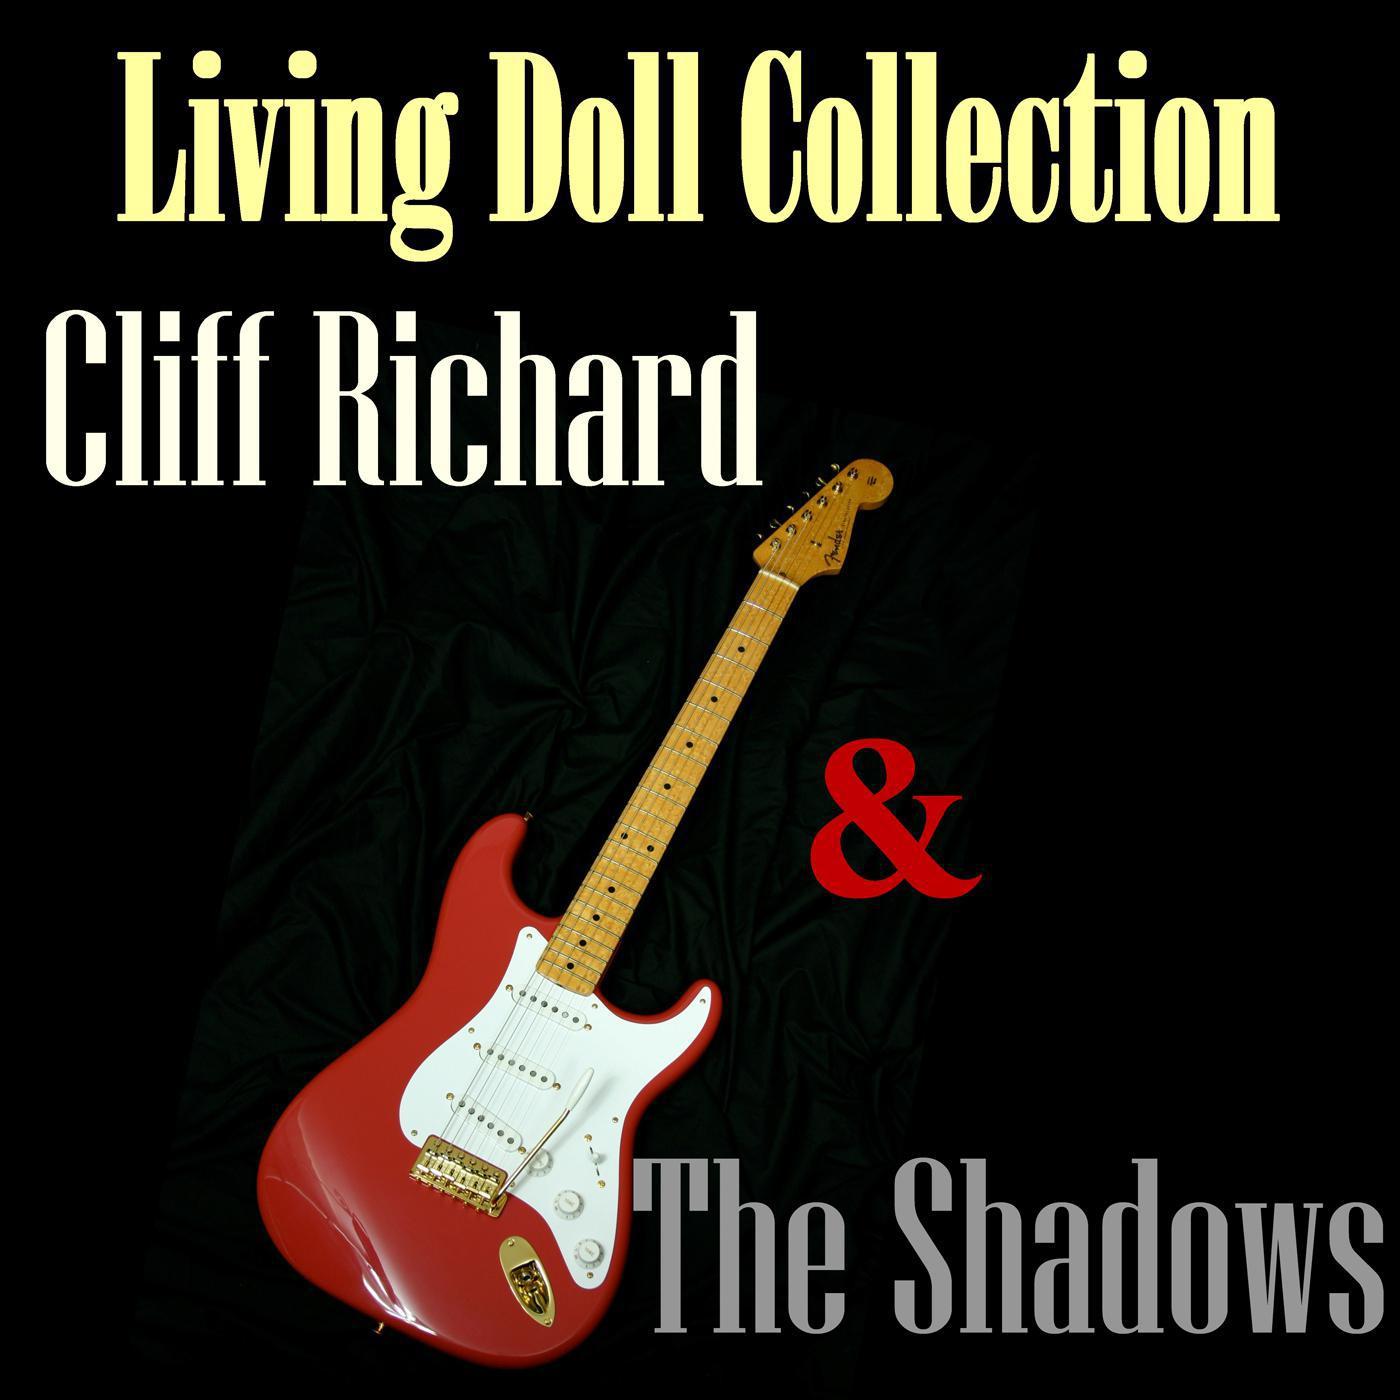 Living Doll - The Collection